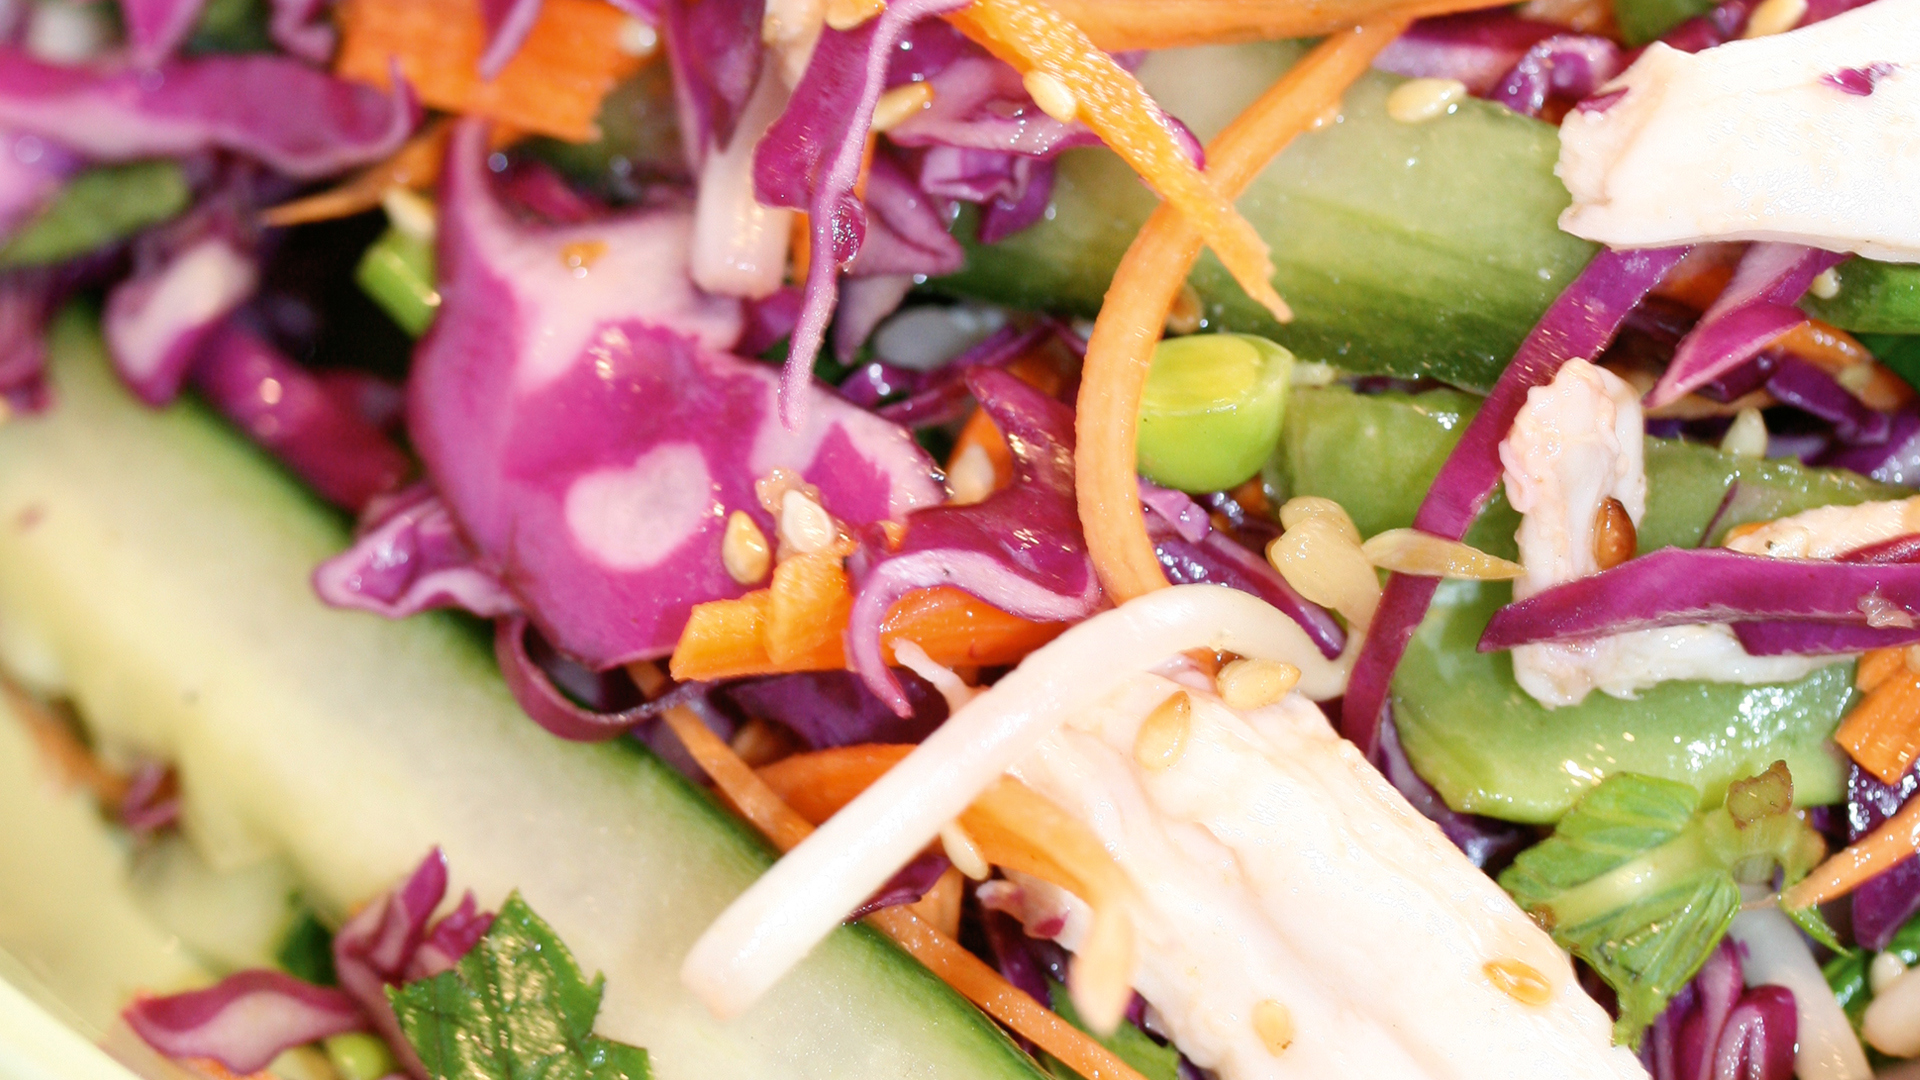 Add shredded chicken and an Asian twist with lime dressing to turn coleslaw into a light meal